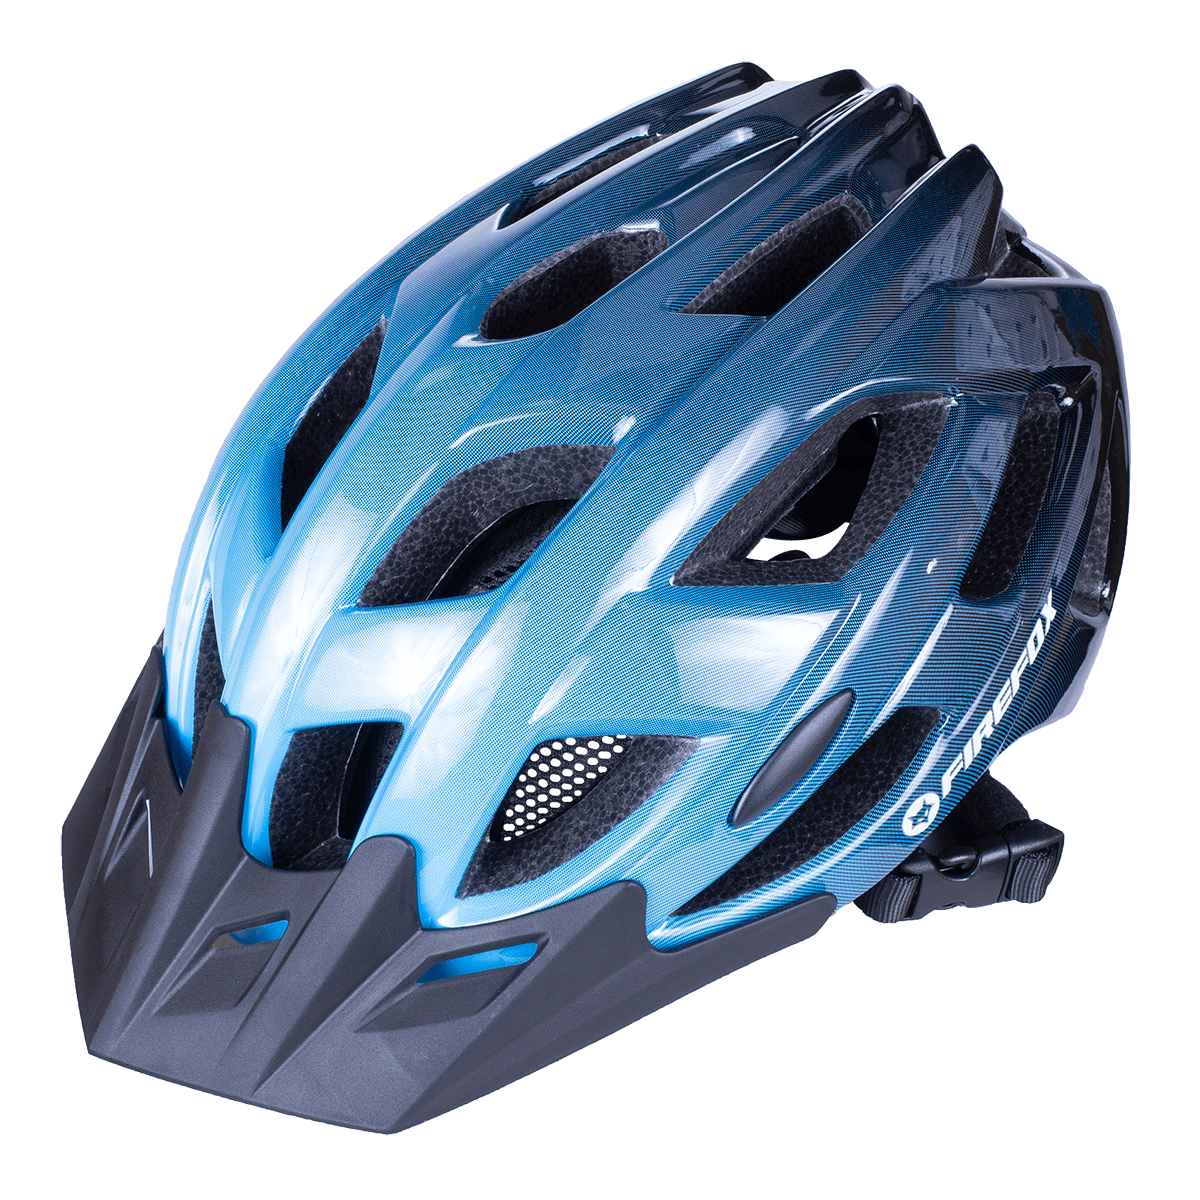 Buy Firefox Cycle Helmet Rider Apparel and Gear Online for Best Price